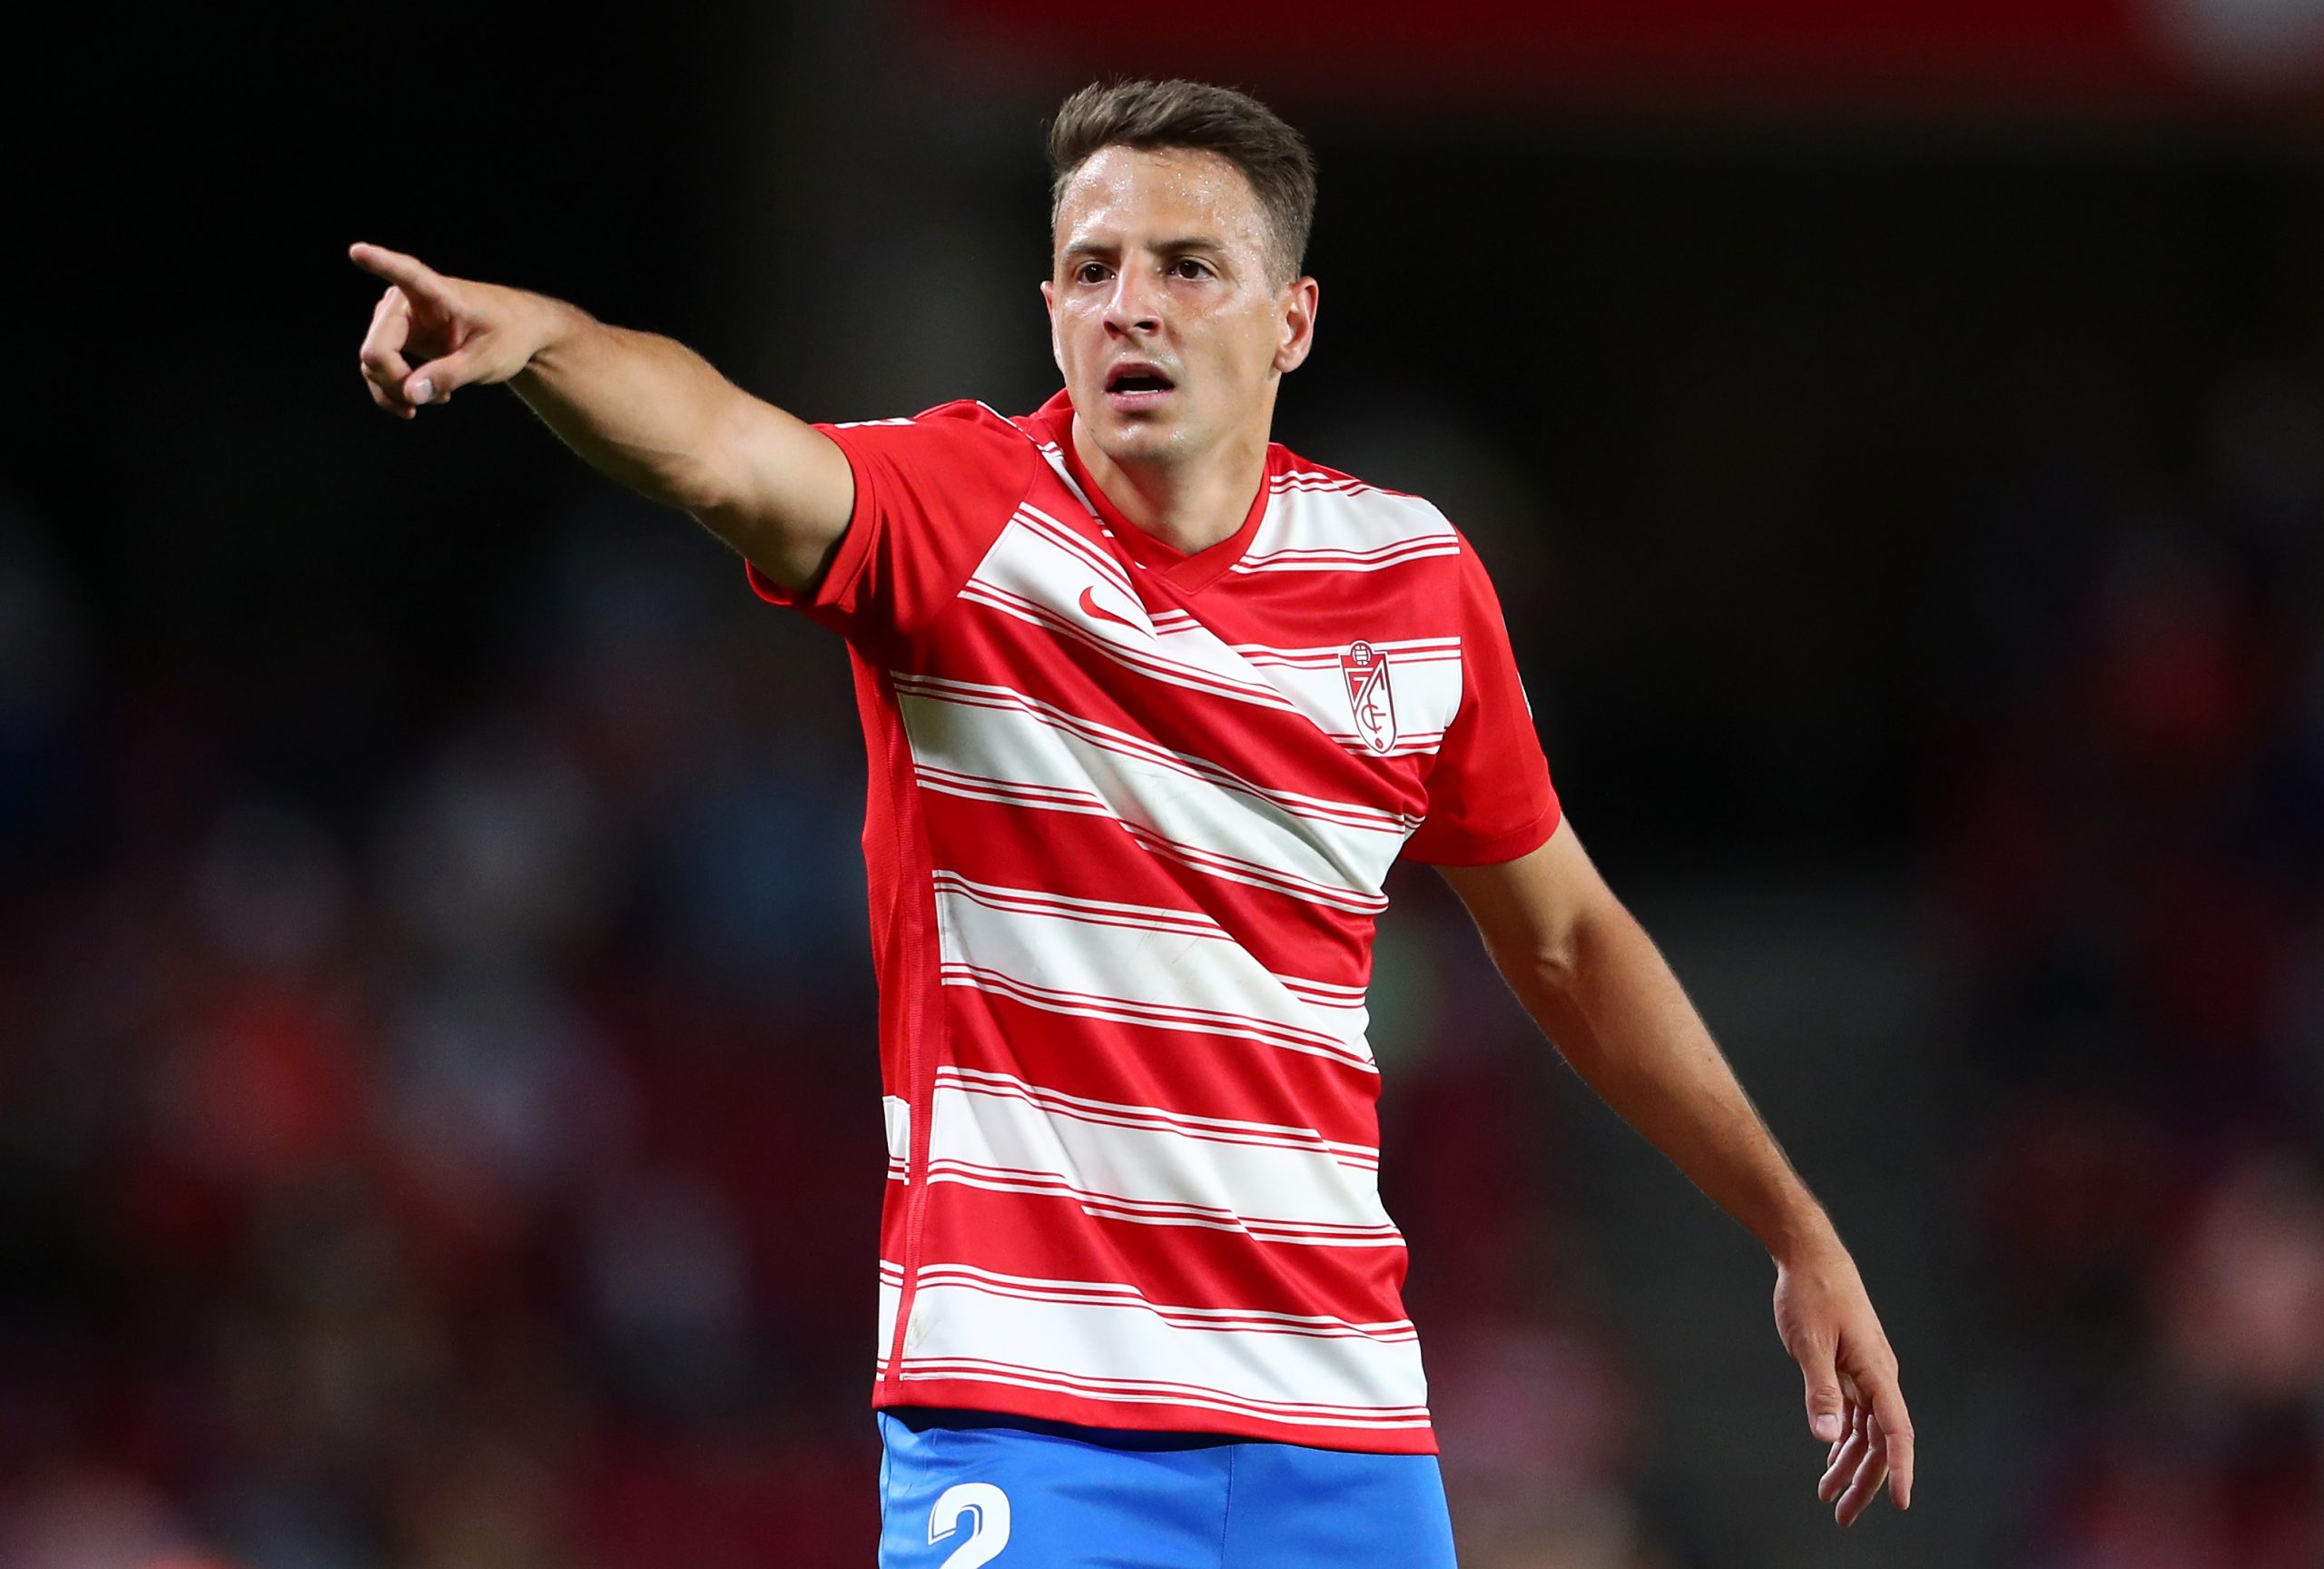 Erik ten Hag pushing to get Santiago Arias with Manchester United ready to make an offer.